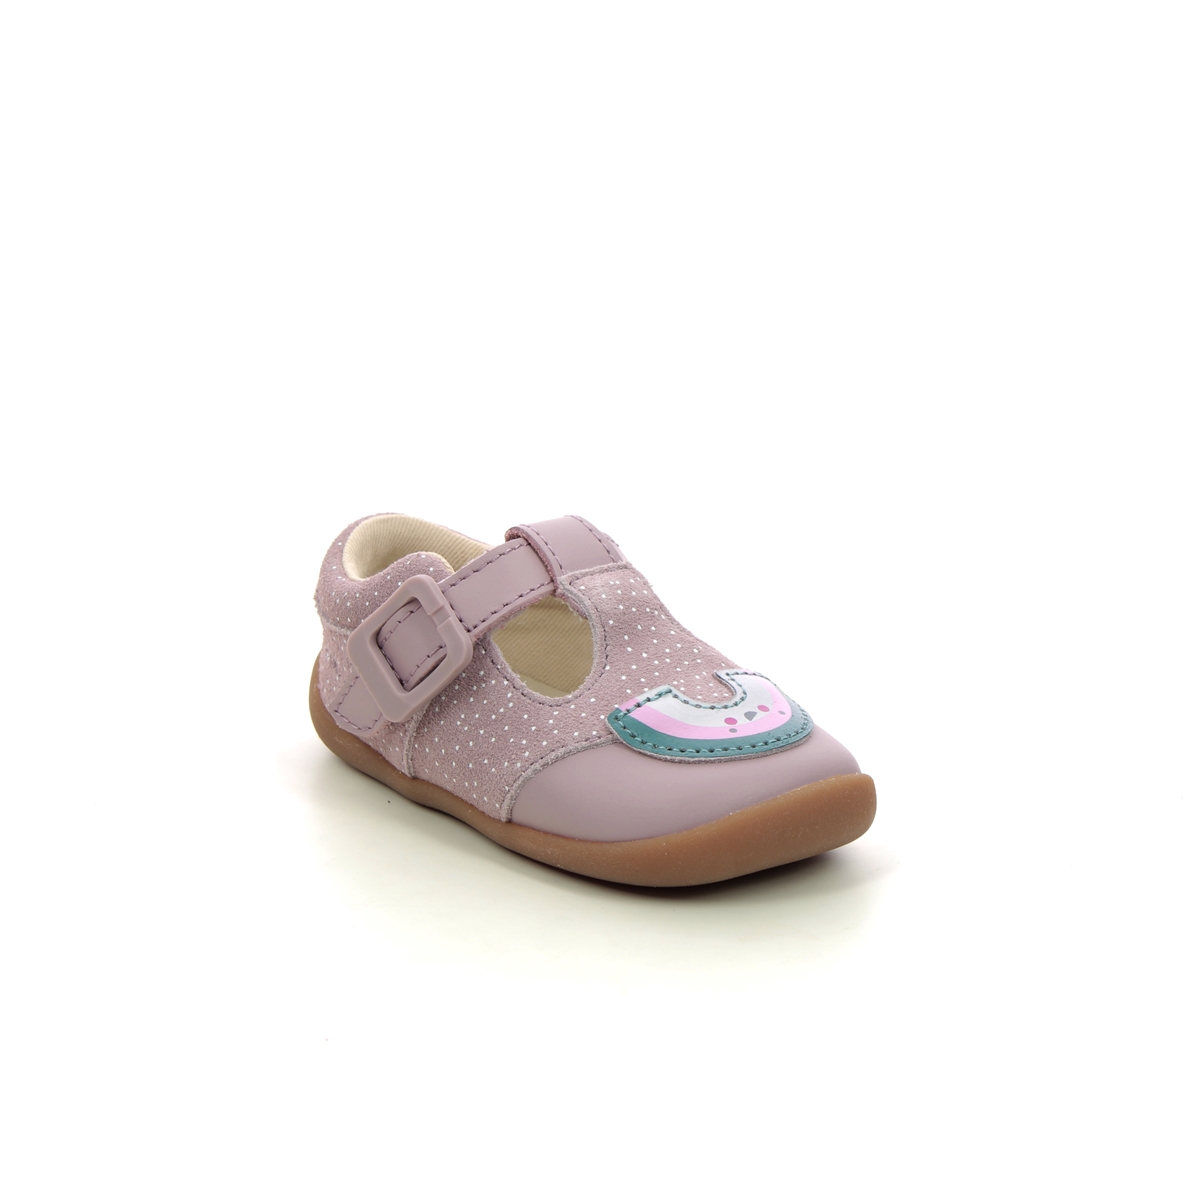 Clarks Roamer Mist T Pink Leather Kids girls first and baby shoes 7527-56F in a Plain Leather in Size 2.5